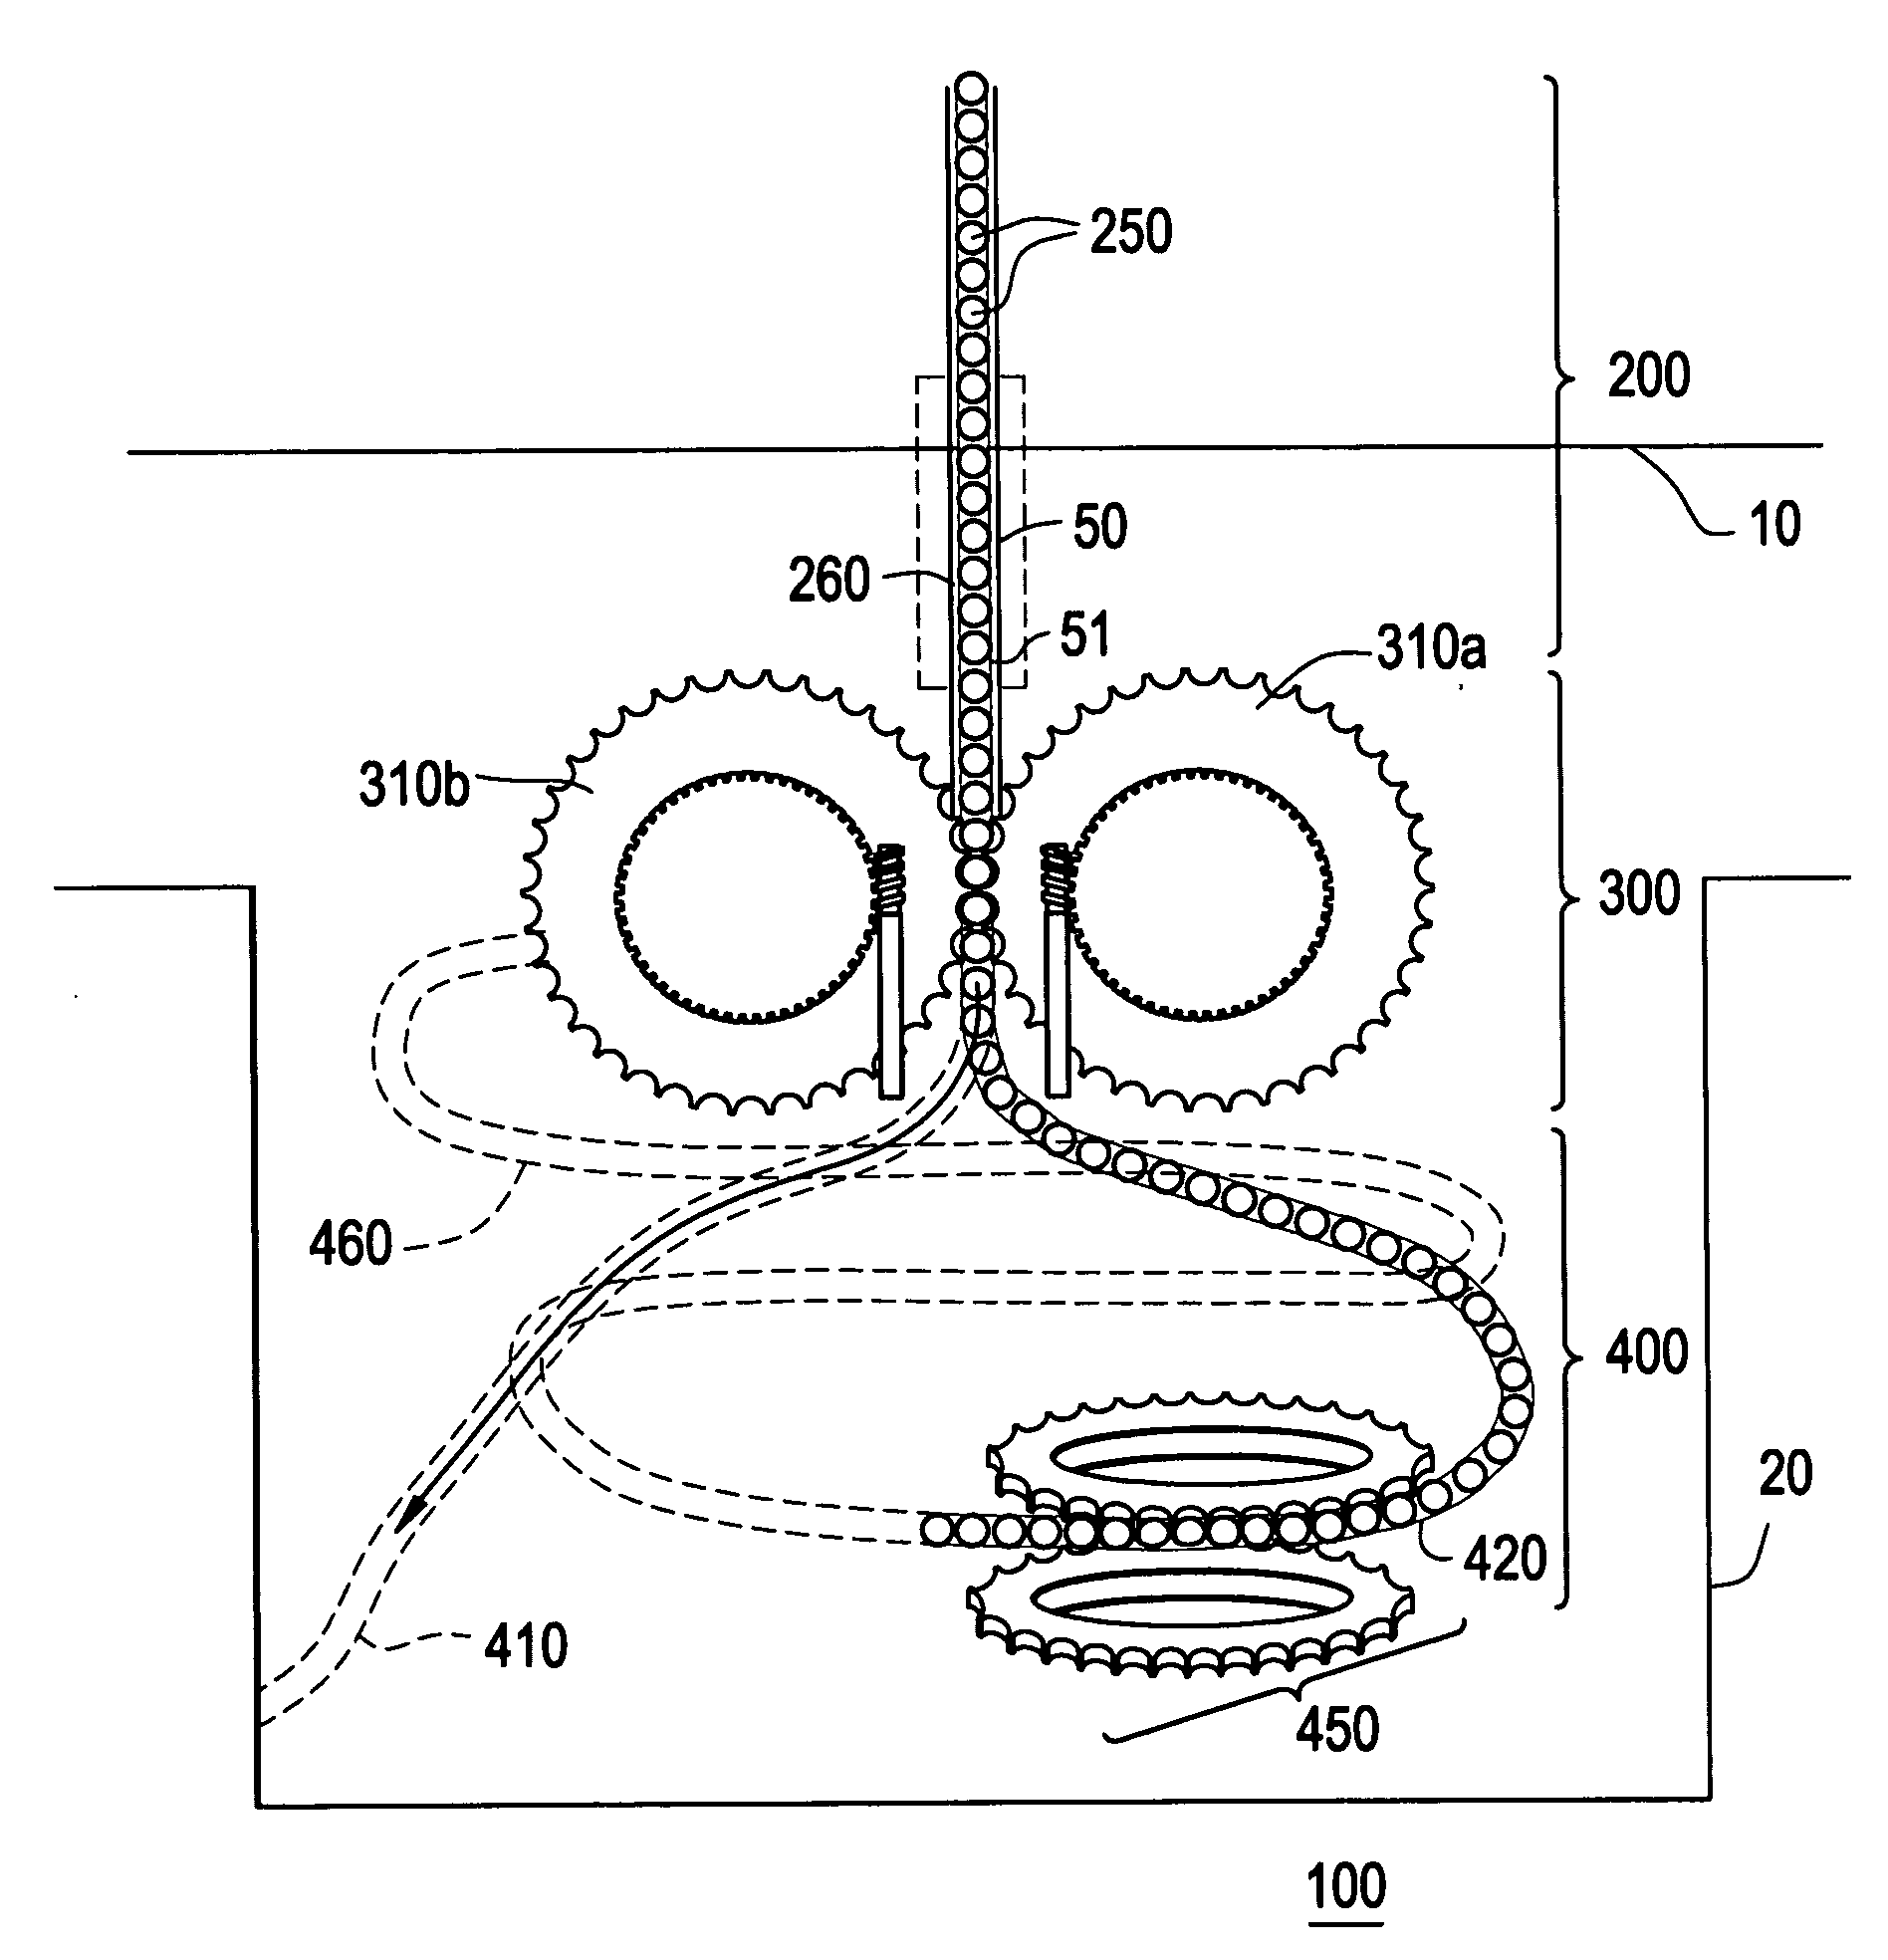 Apparatuses and methods for production of radioisotopes in nuclear reactor instrumentation tubes